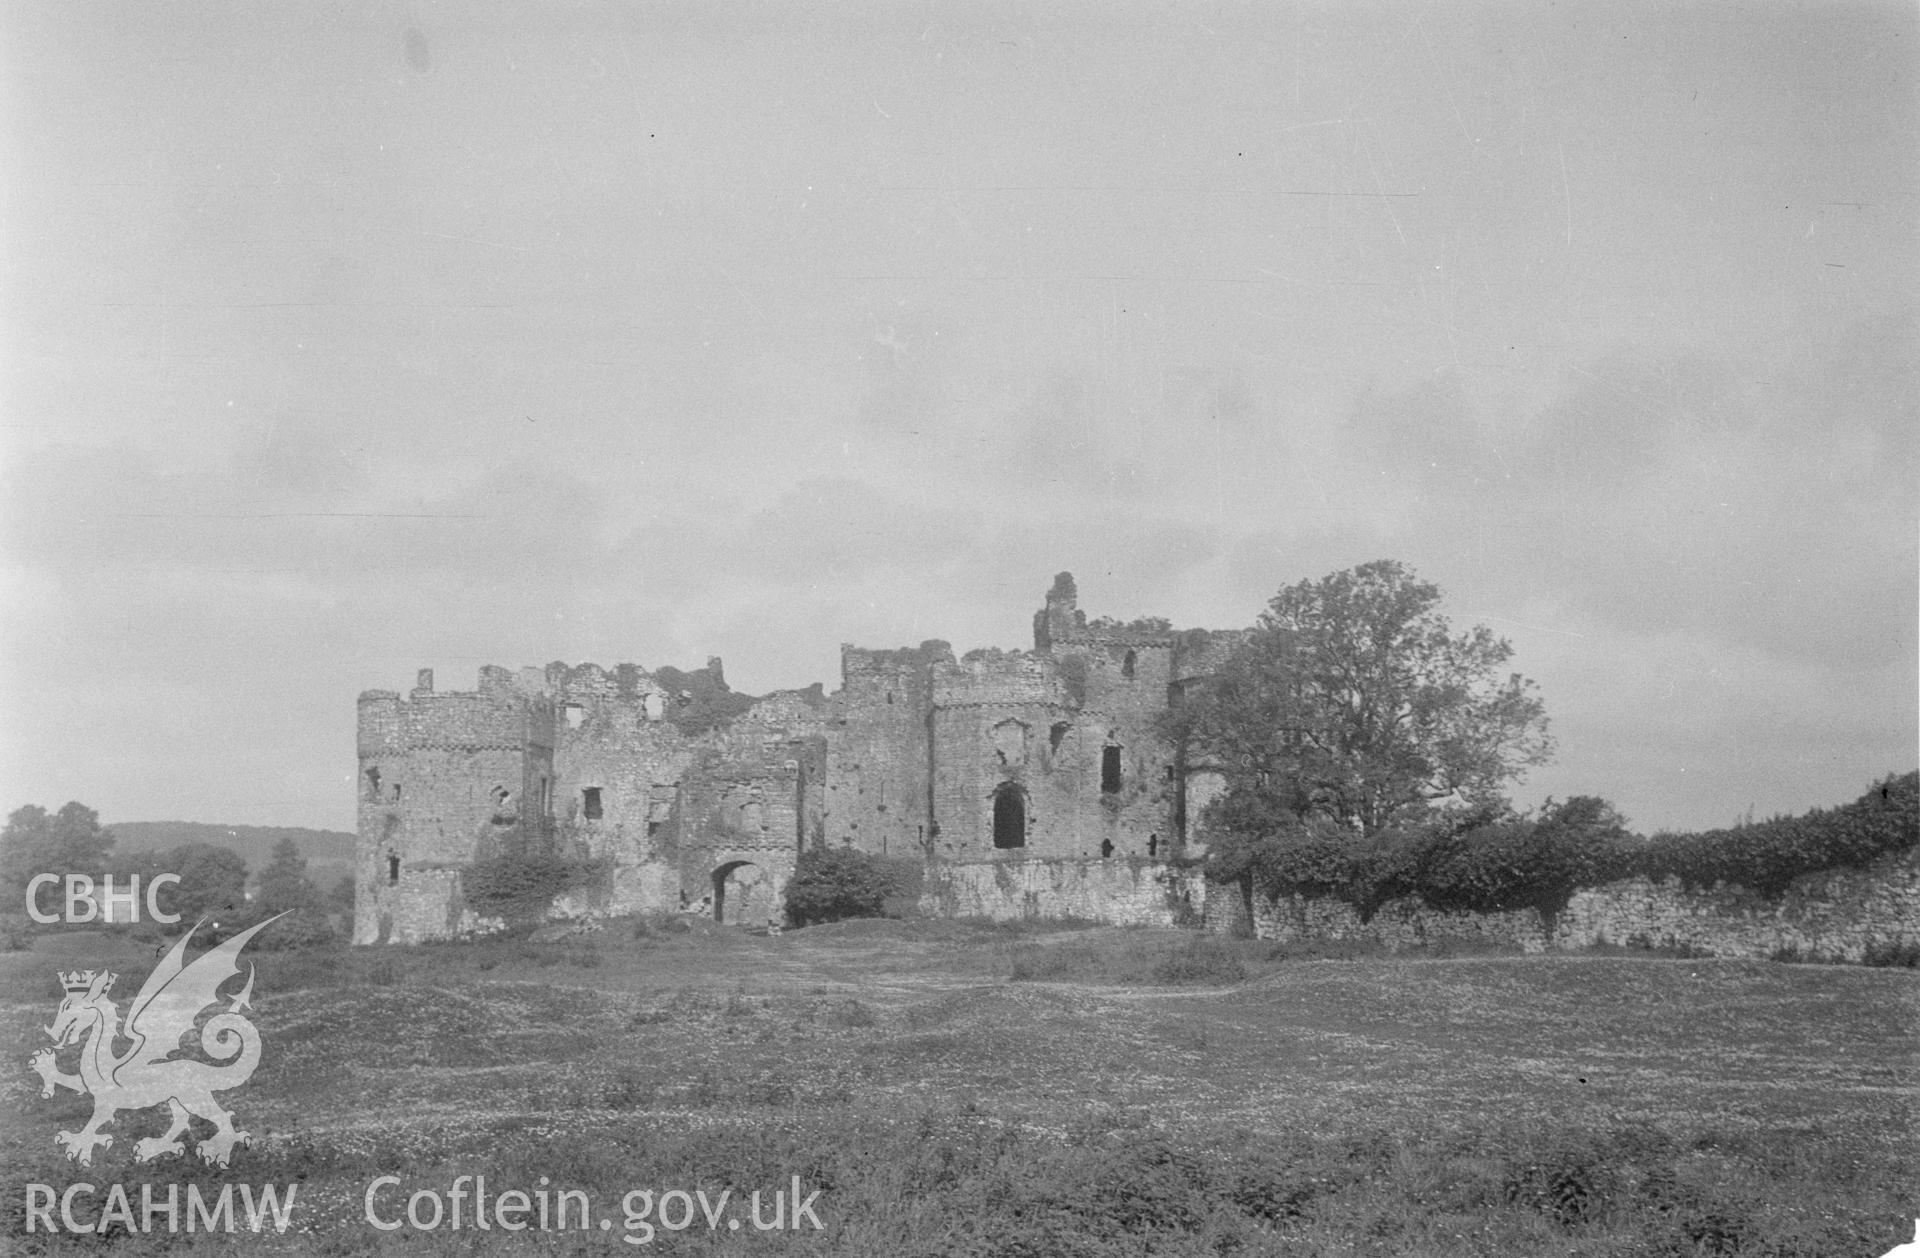 Black and white nitrate negative showing exterior view of Carew Castle.